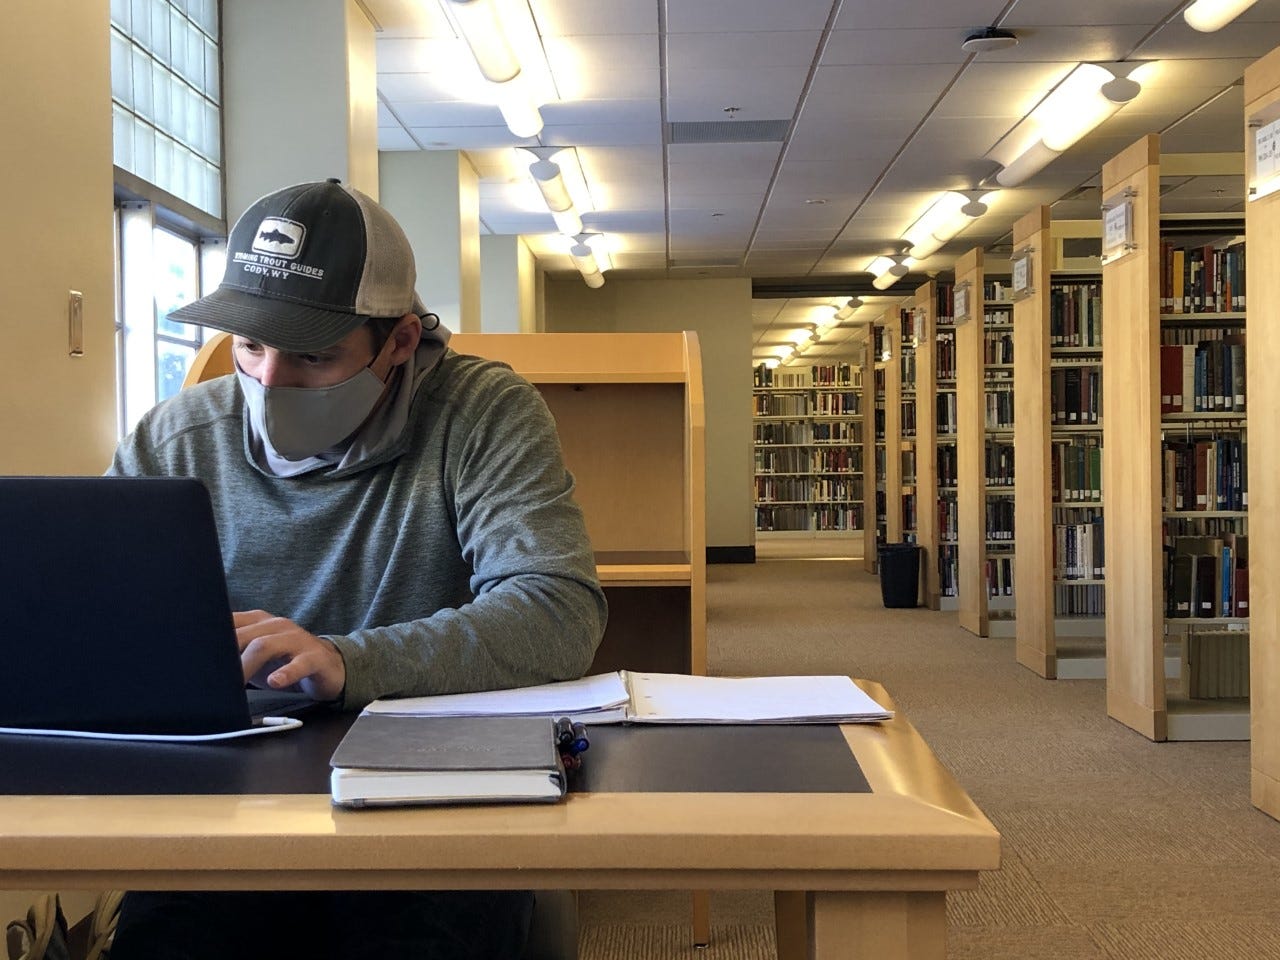 A young man in a gray sweatshirt, ball cap and mask looks at his laptop. Book shelves fade into the background.